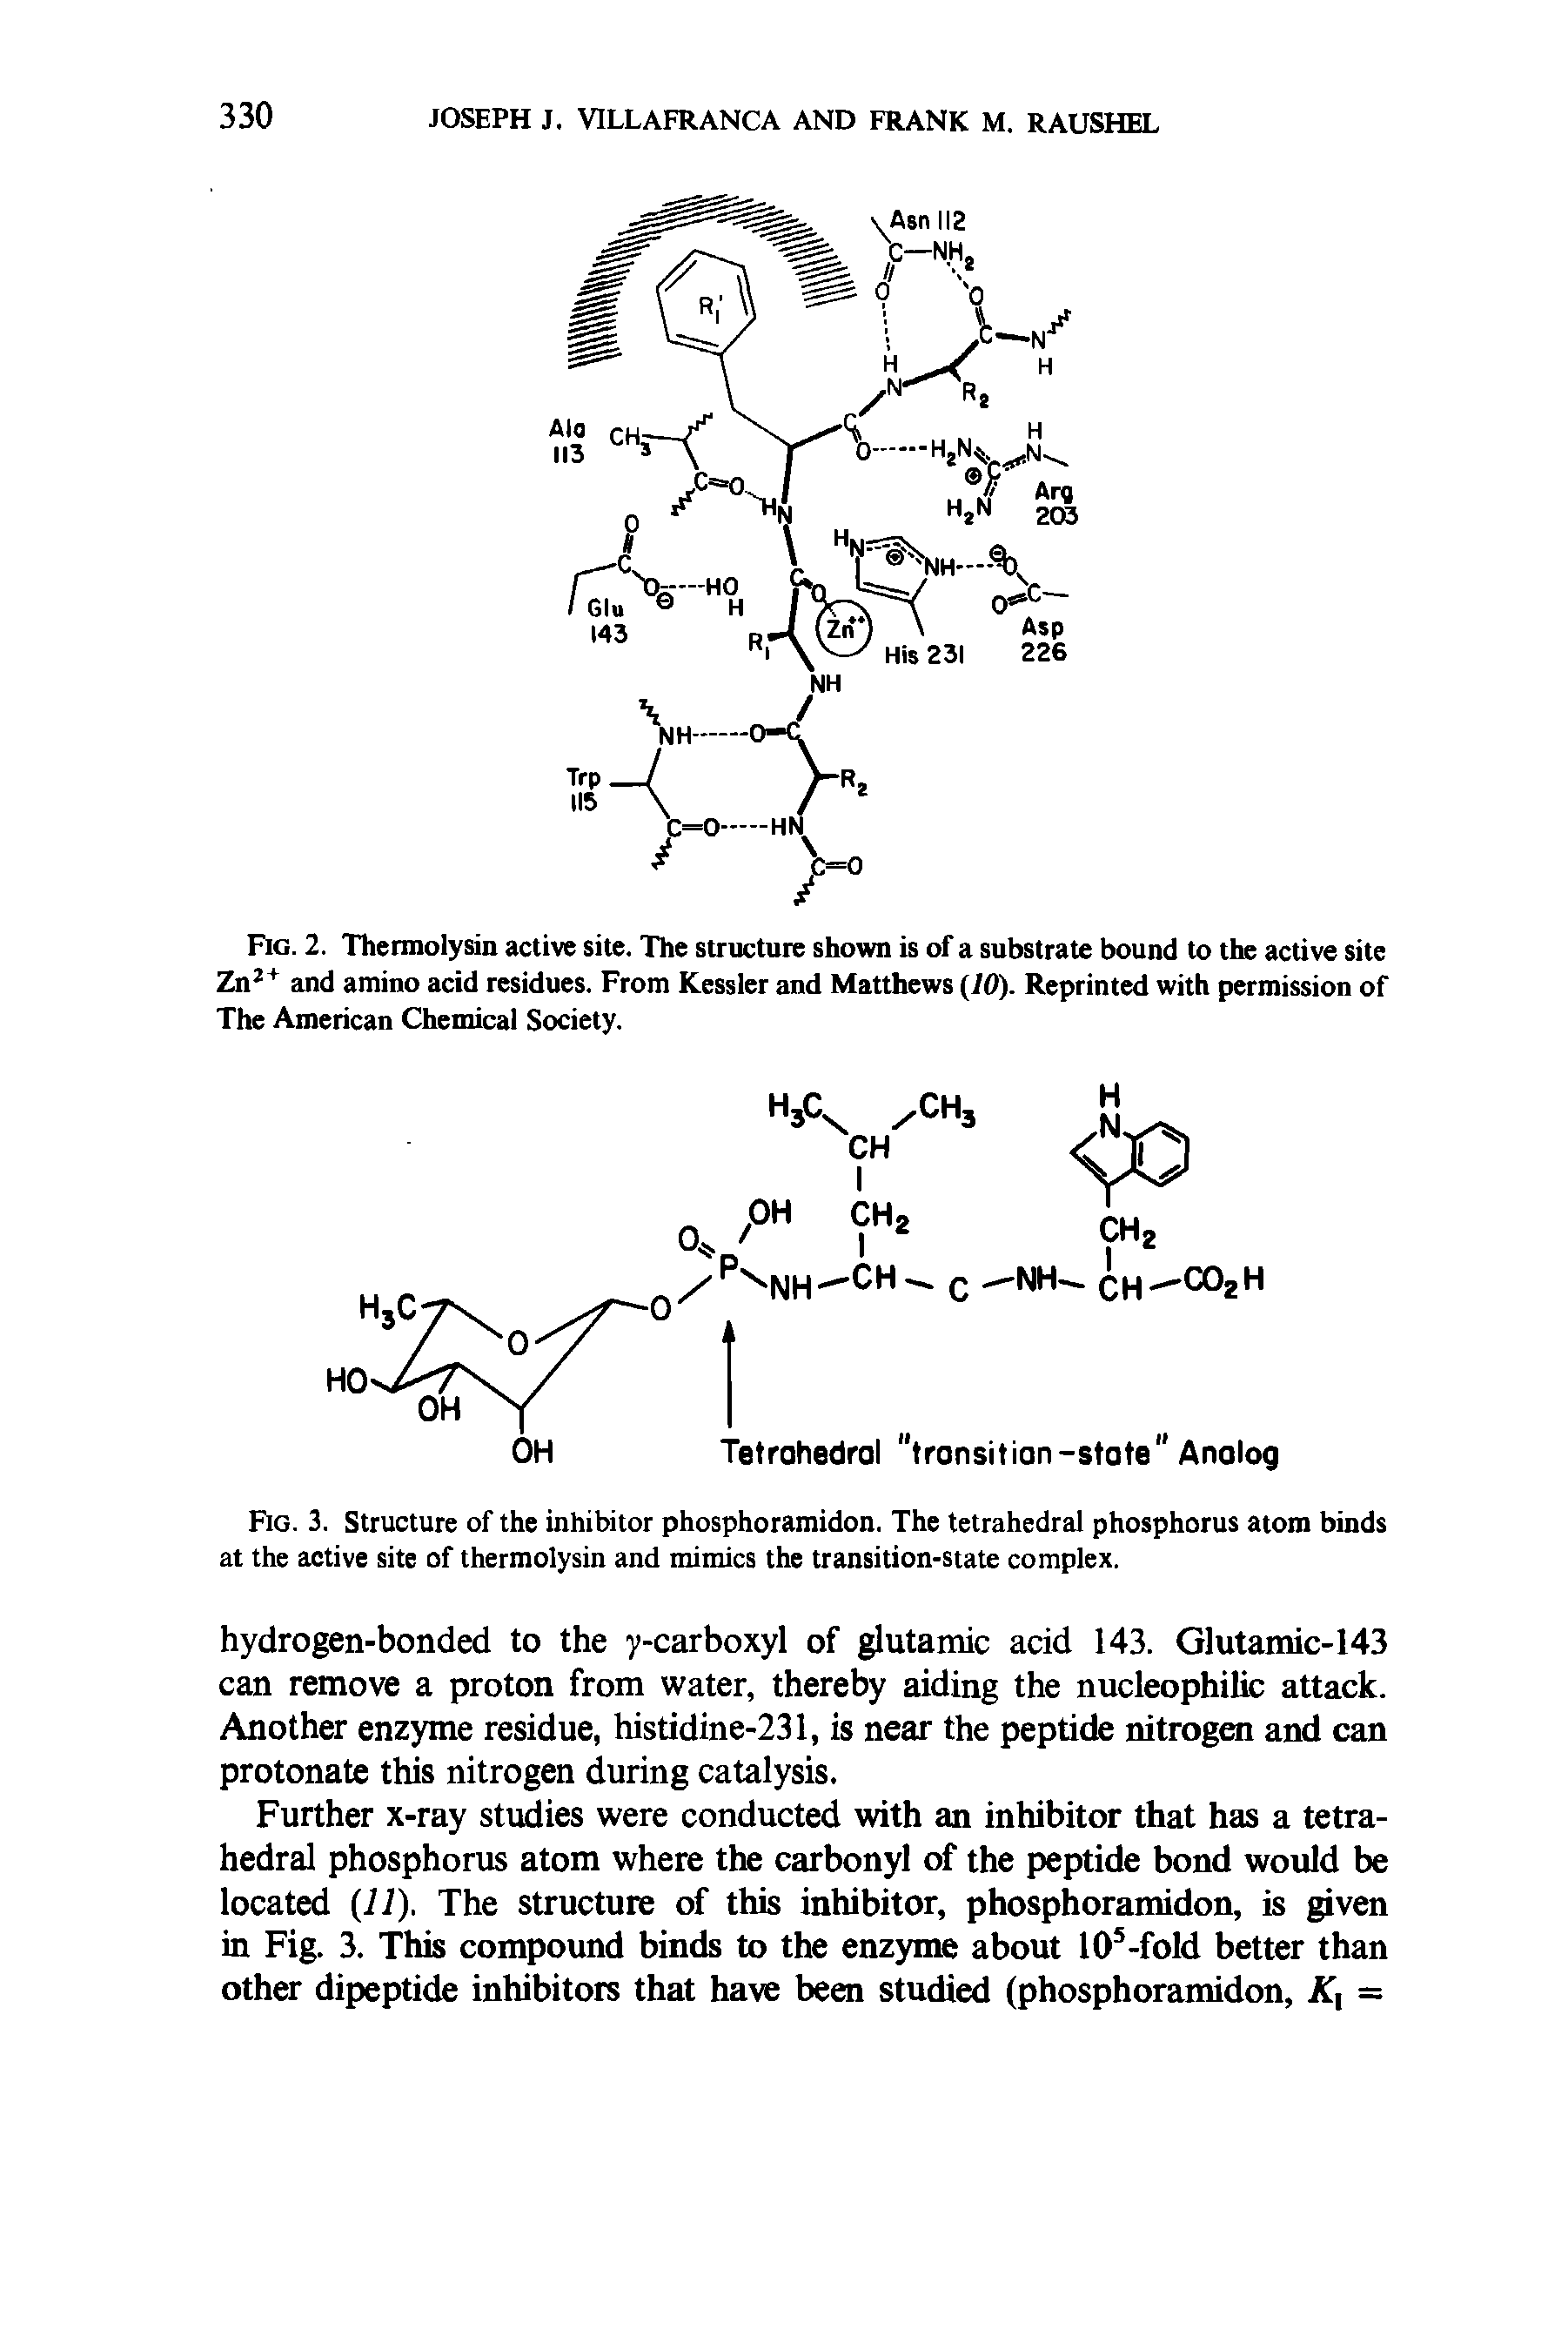 Fig. 2. Thermolysin active site. The structure shown is of a substrate bound to the active site 2n2+ and amino acid residues. From Kessler and Matthews (JO). Reprinted with permission of The American Chemical Society.